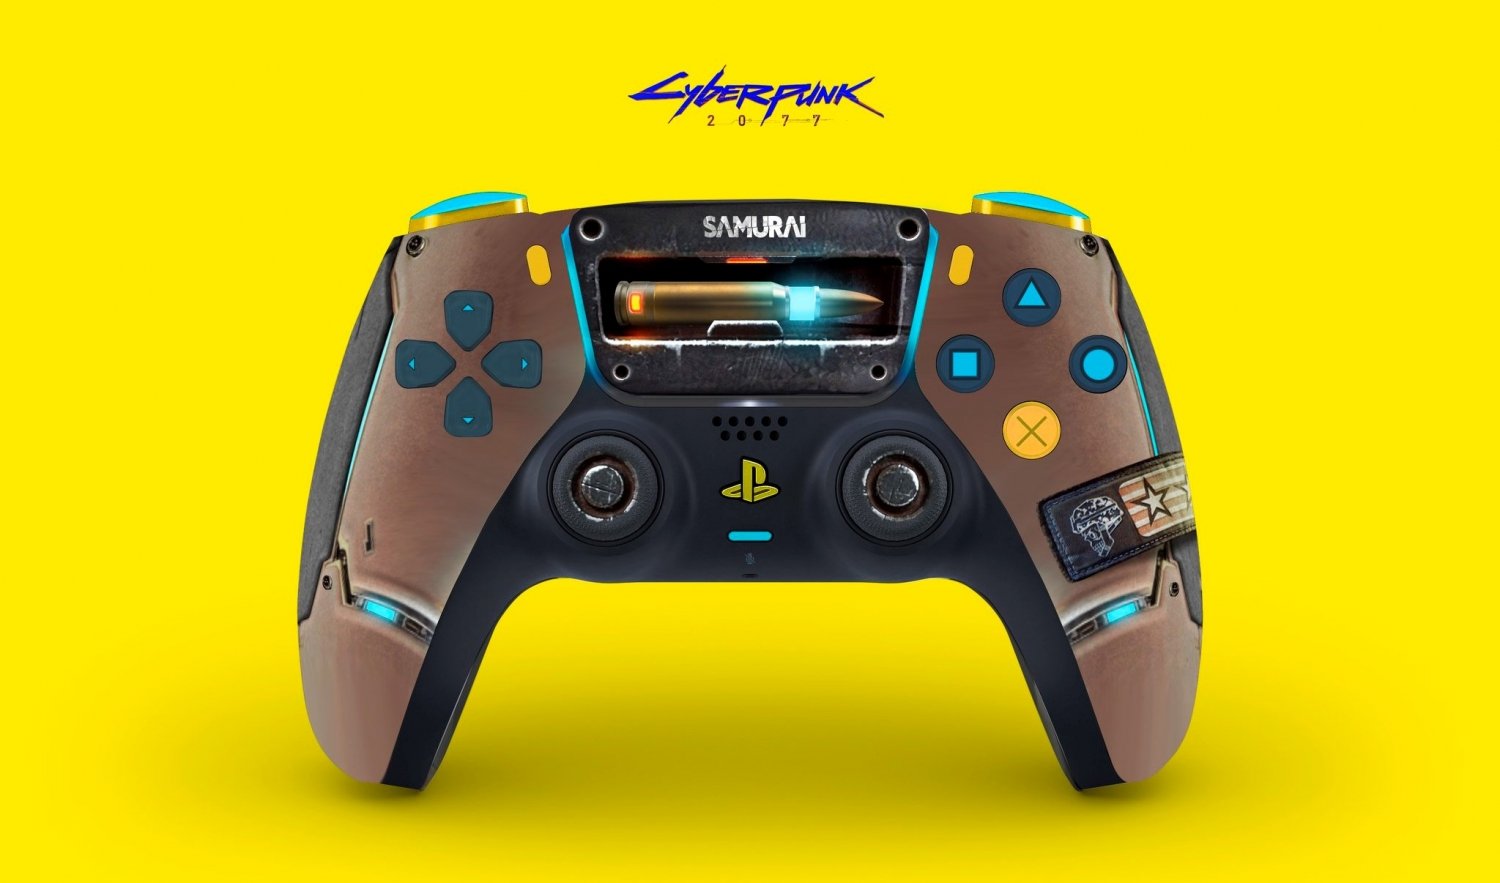 Check out this Cyberpunk 2077 themed PlayStation 5 controller